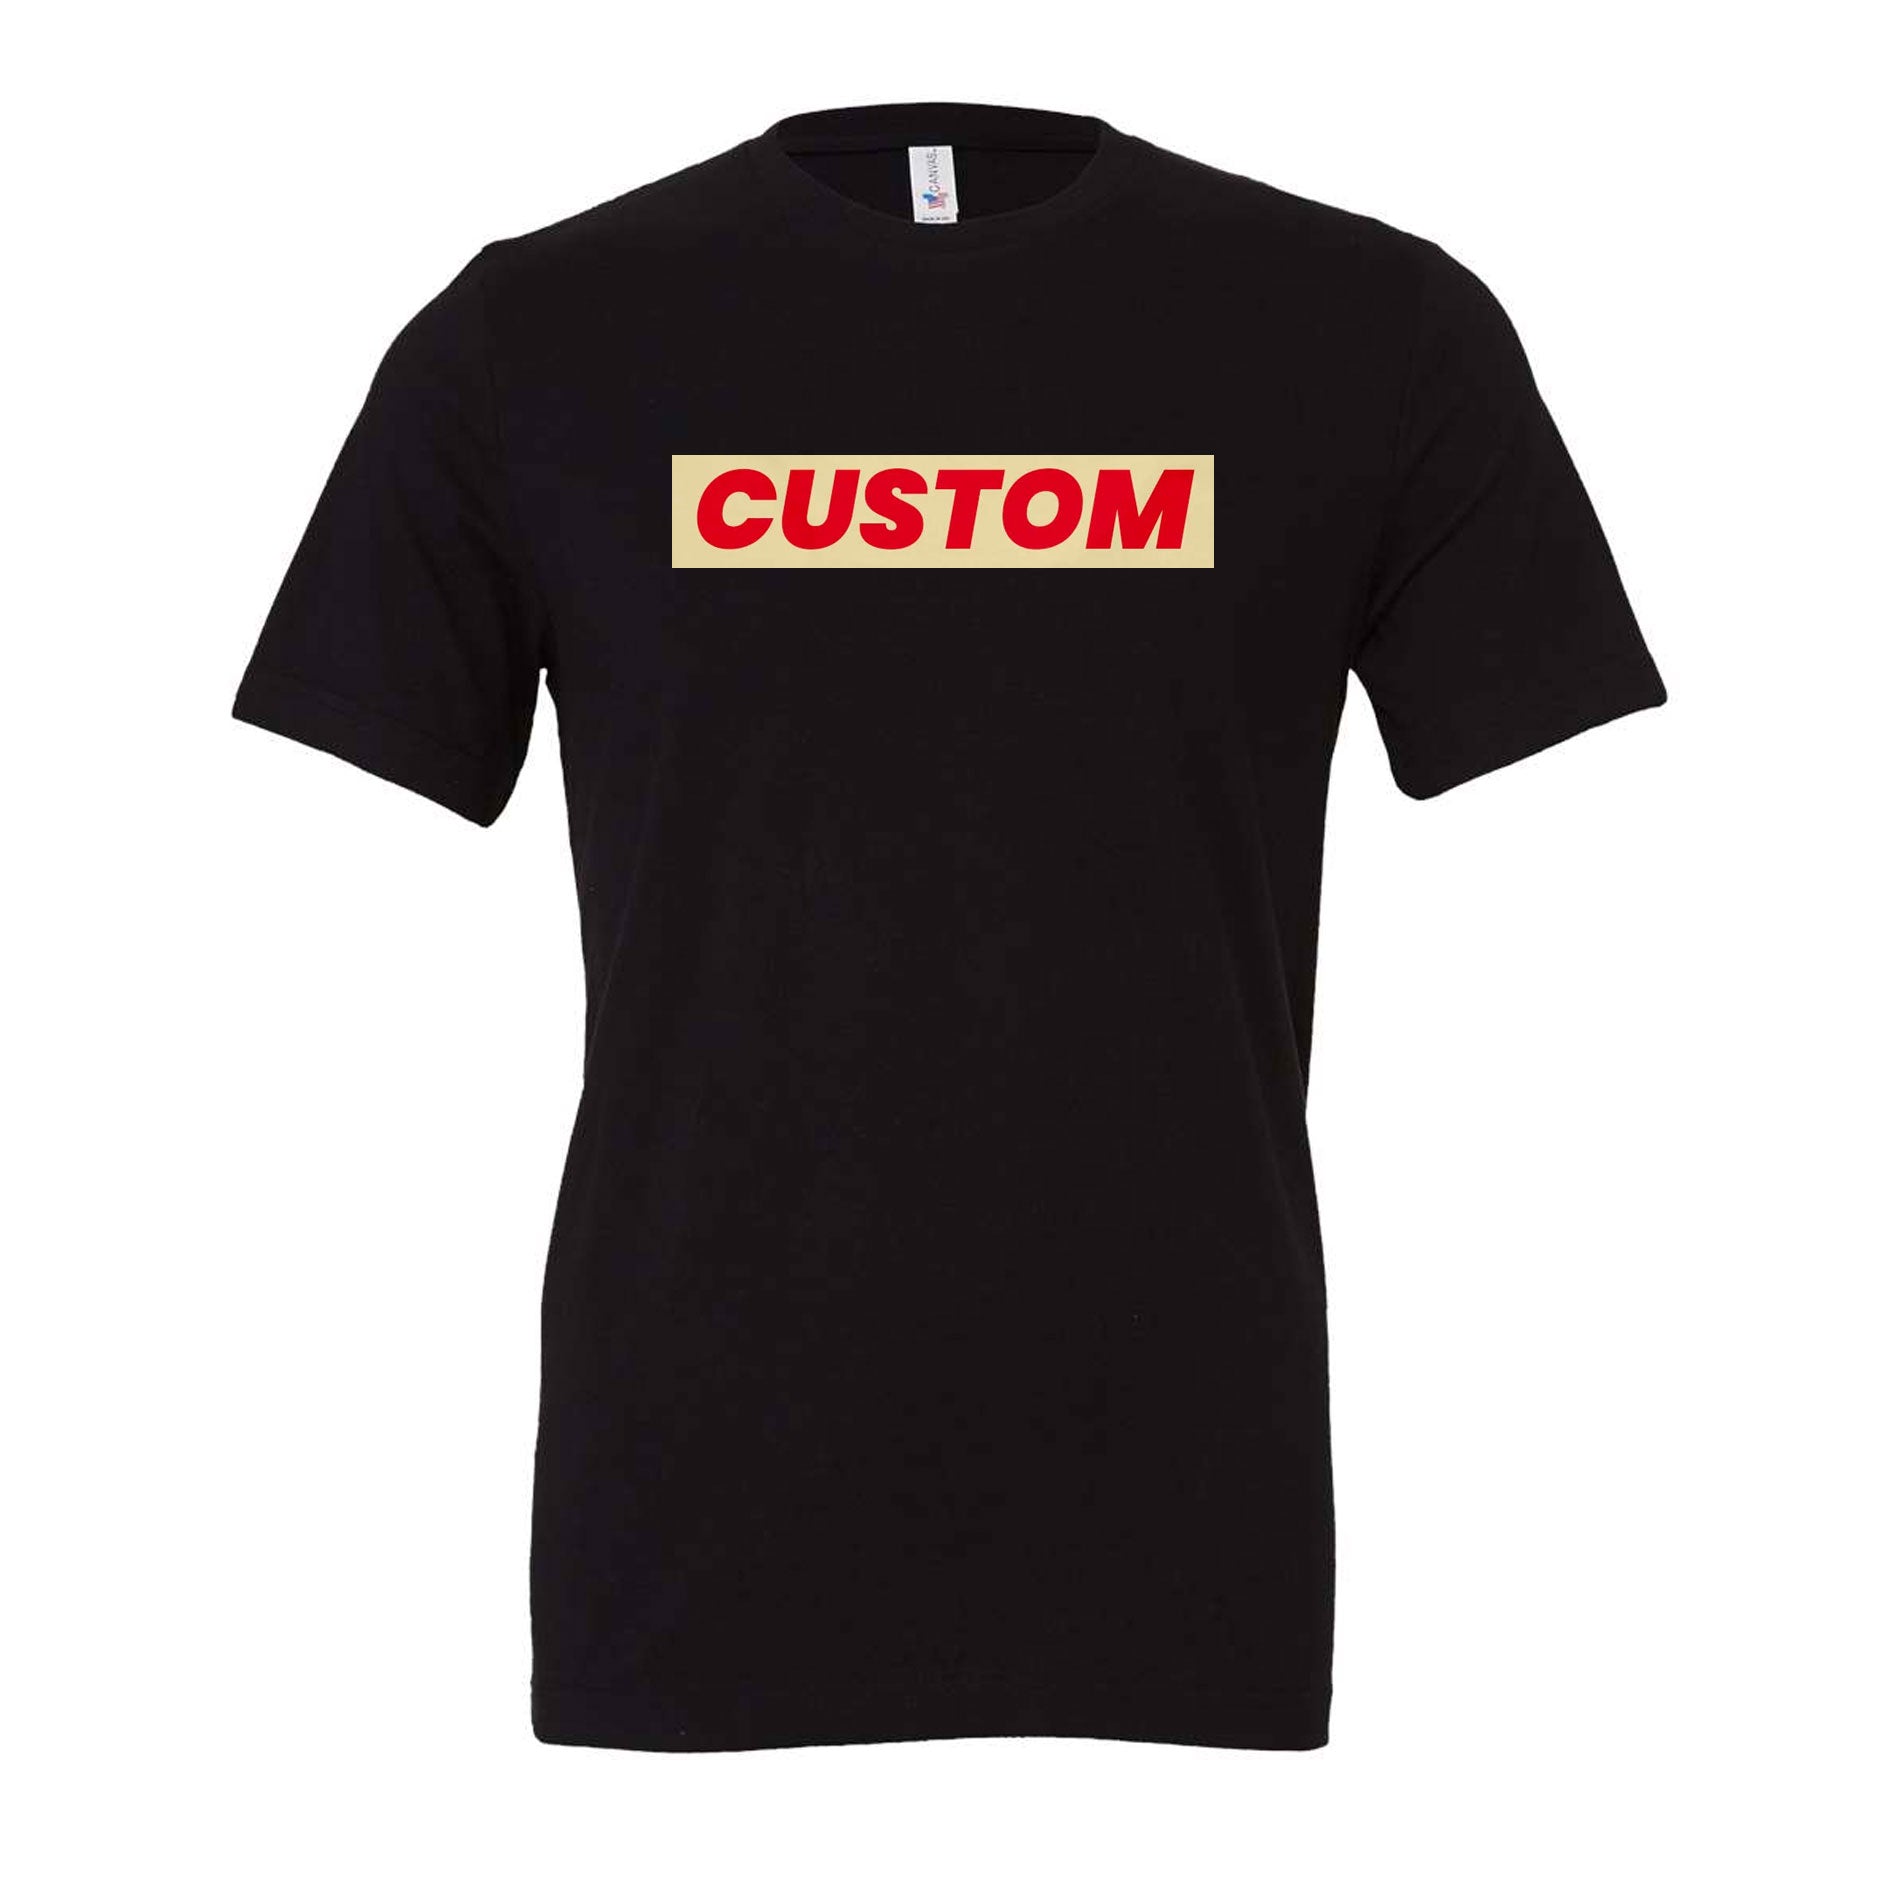 custom t-shirts lightweight and soft from bella canvas los angeles, easy process